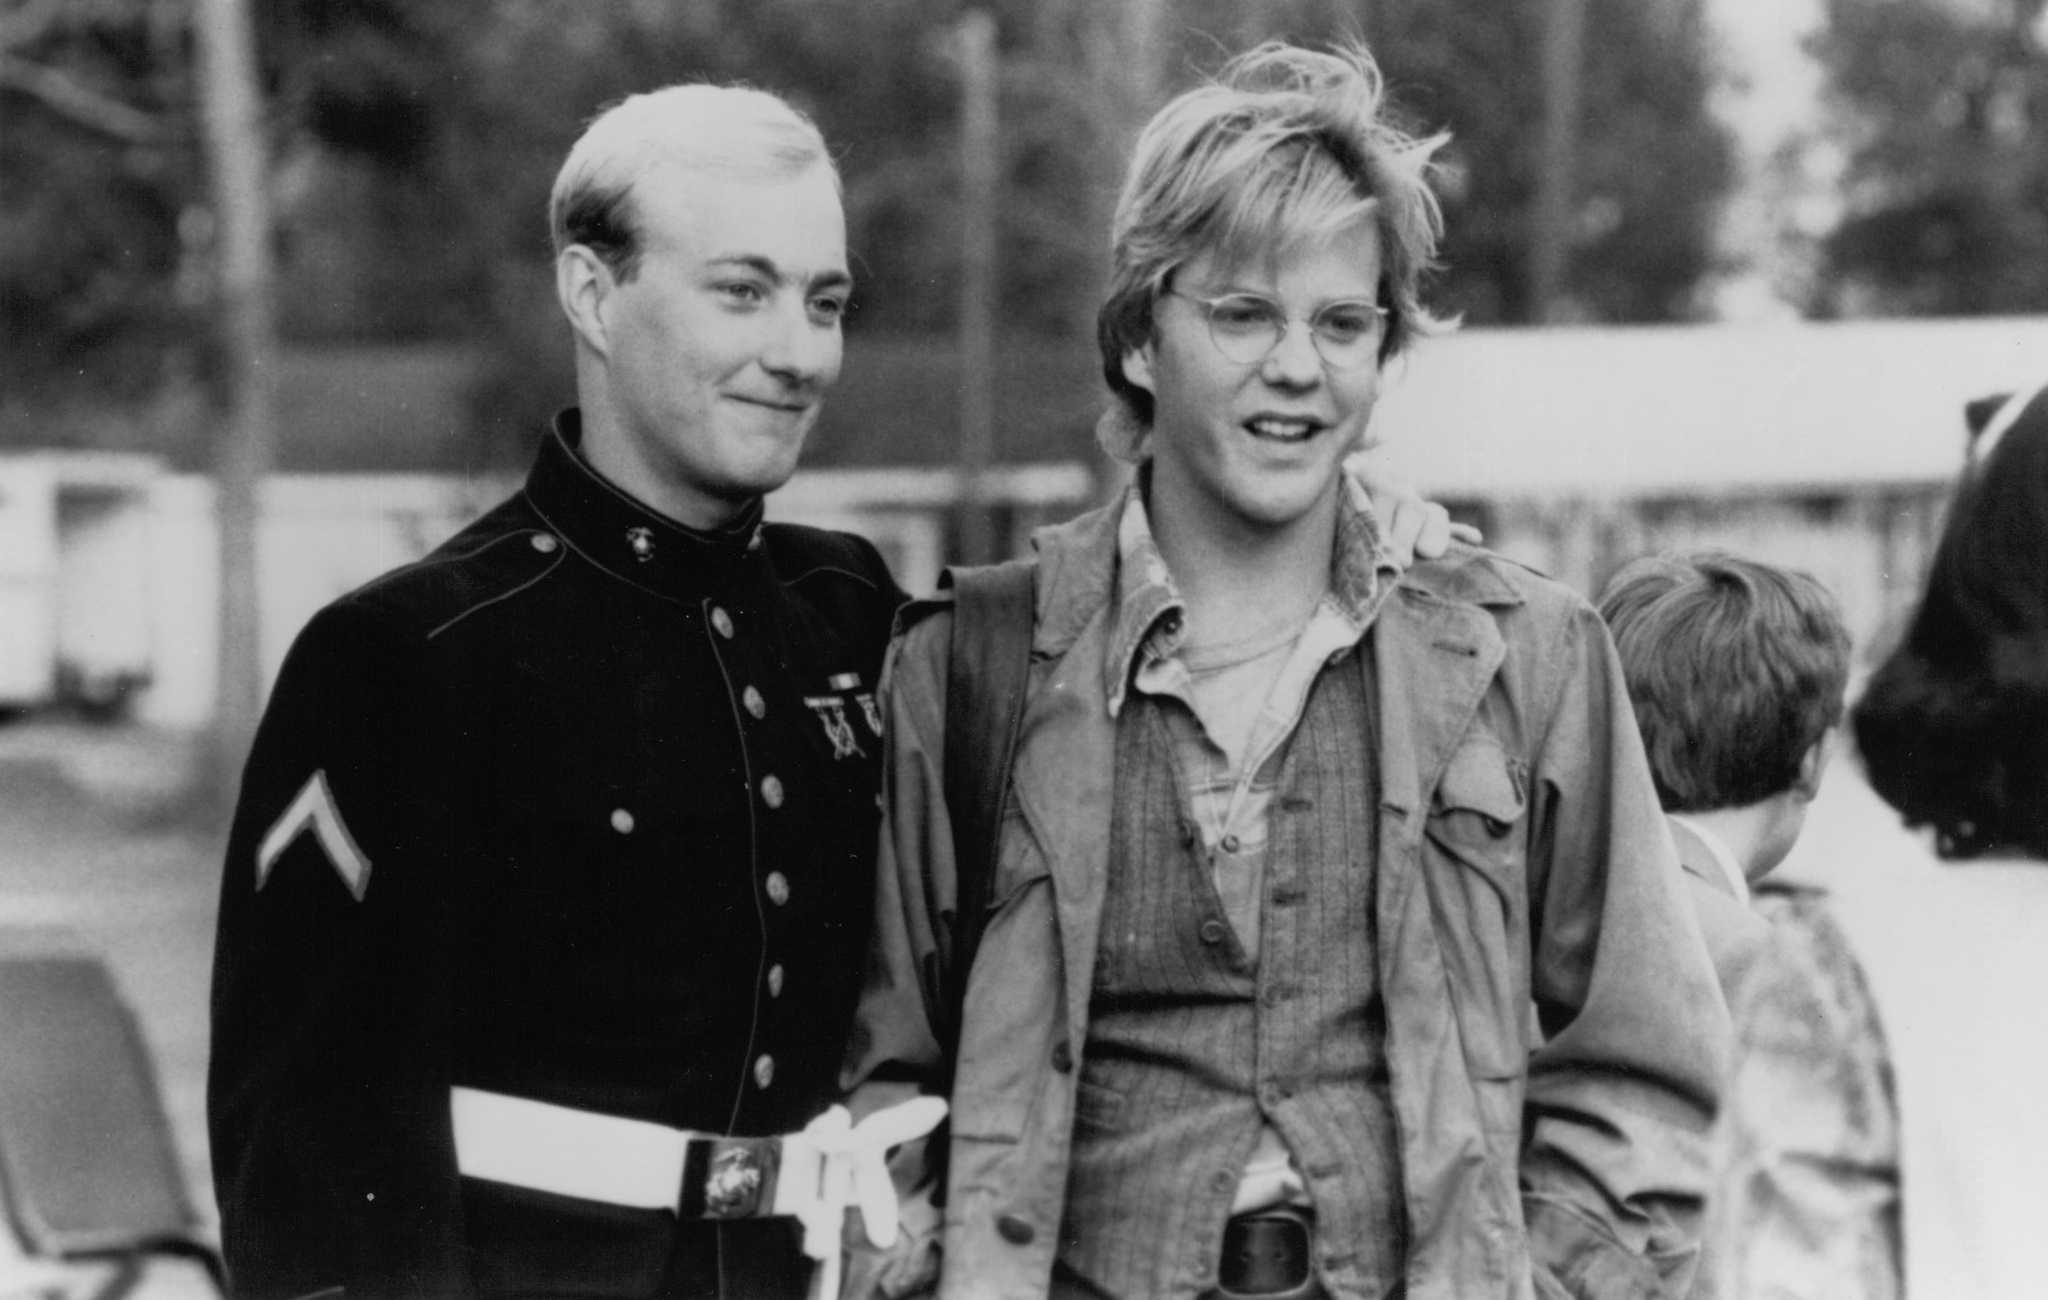 Still of Kiefer Sutherland and Christopher Wynne in 1969 (1988)